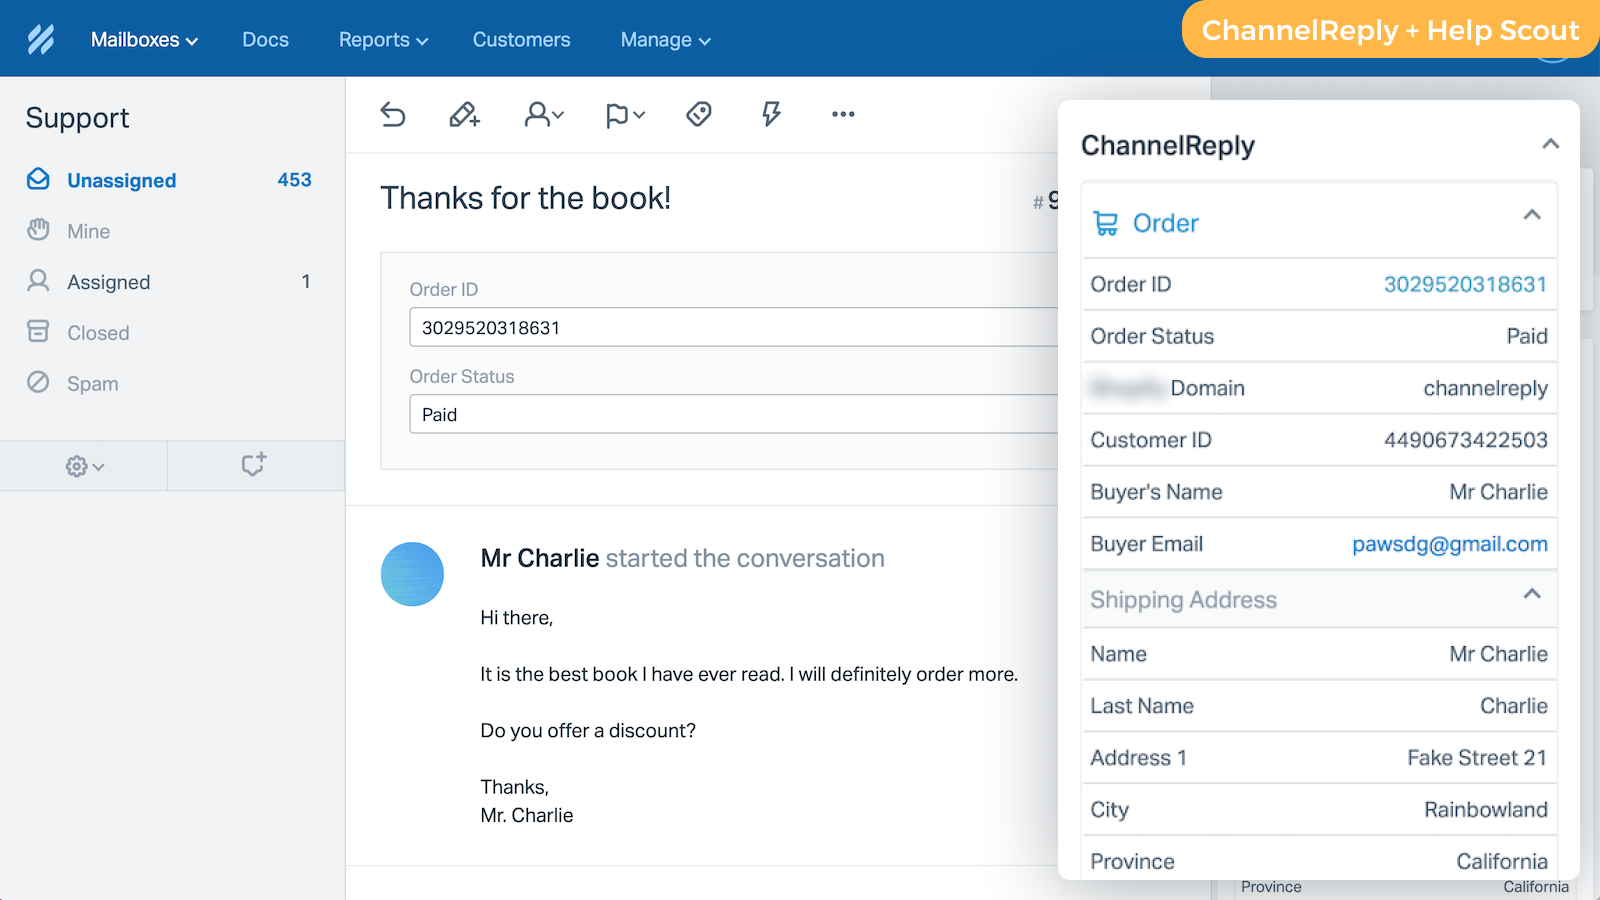 ChannelReply displaying Shopify data in Help Scout